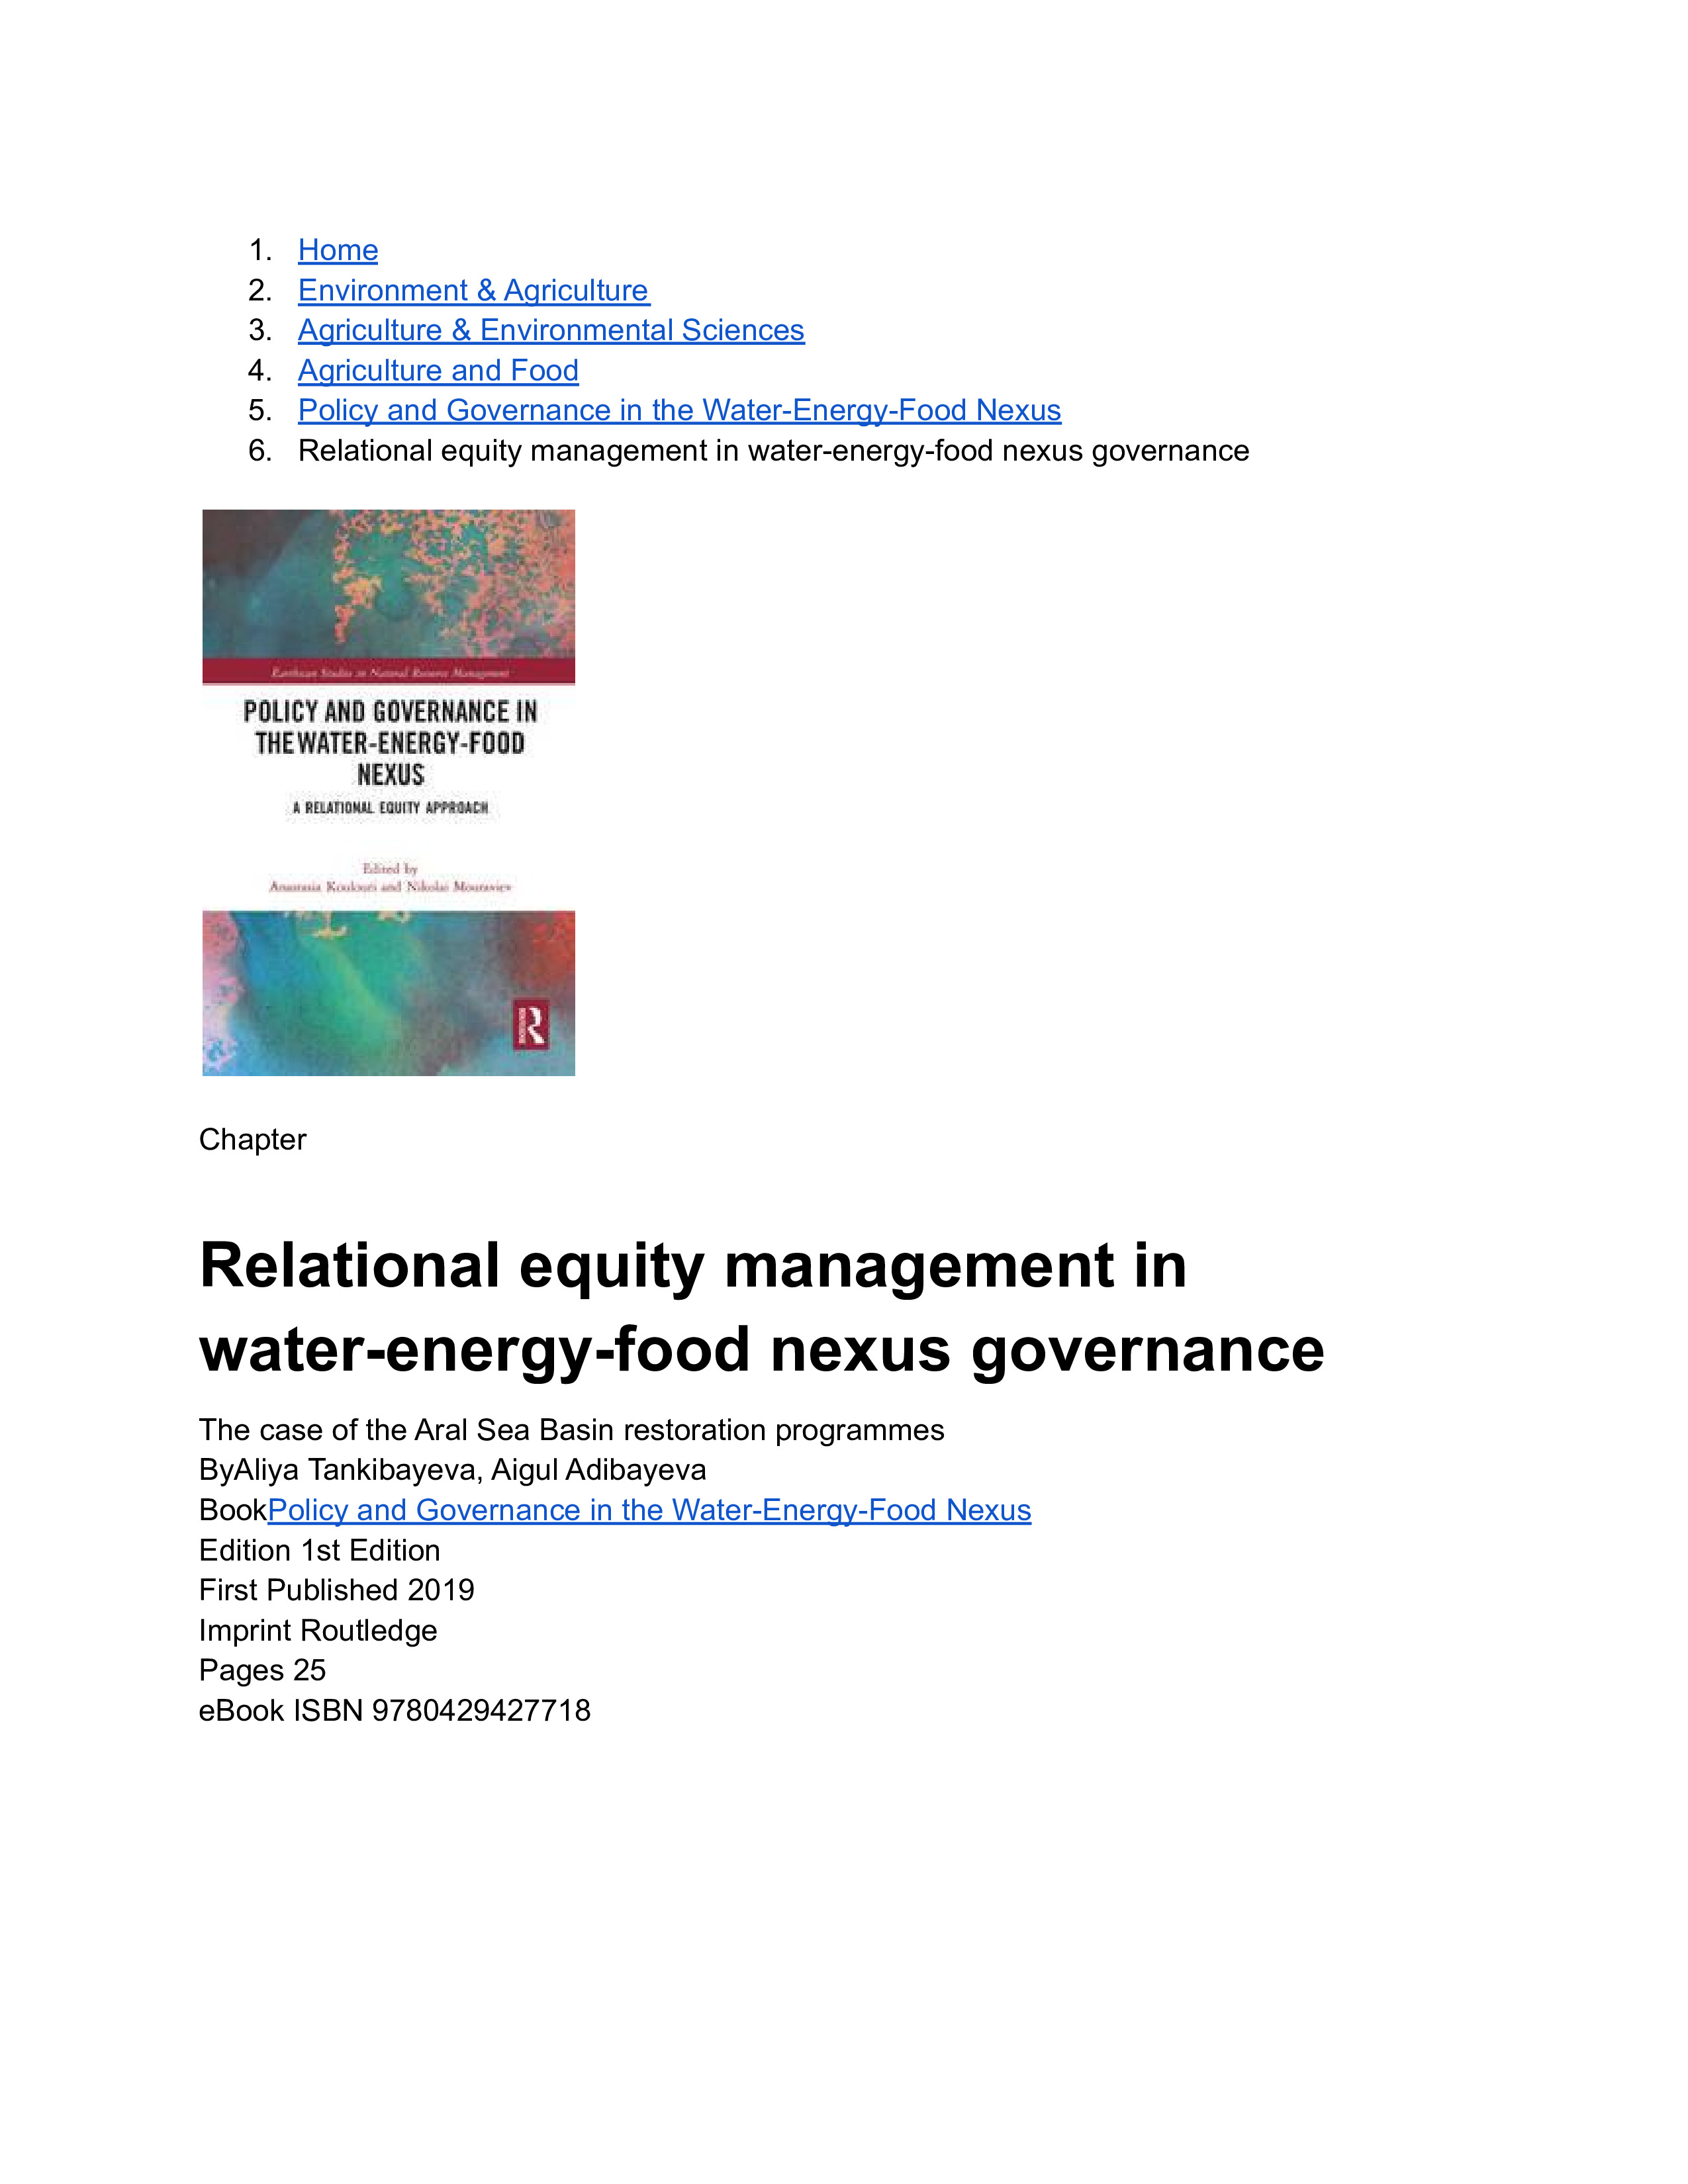  Chapter Relational equity management in water-energy-food nexus governance. The case of the Aral Sea Basin restoration programmes | A.Tankibayeva, A.Adibayeva